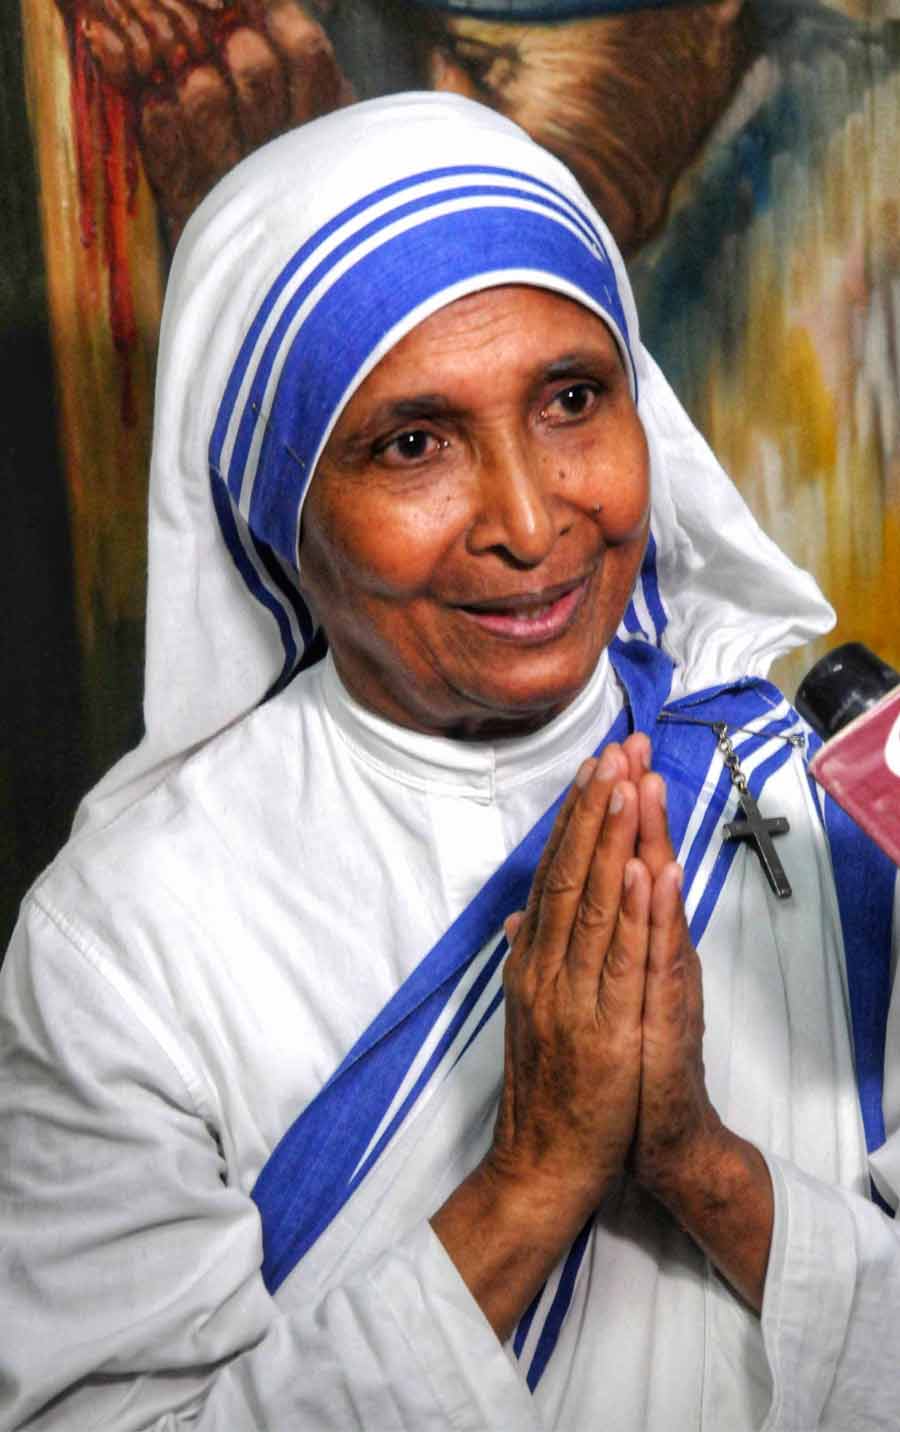 GREETINGS: Sister Joseph, the new superior general of the Missionaries of Charity, speaks to the press at Mother House in central Kolkata on Wednesday, March 23. Sister Joseph, who was elected on March 19, replaced Sister Prema, who helmed the organisation founded by Mother Teresa for 13 years